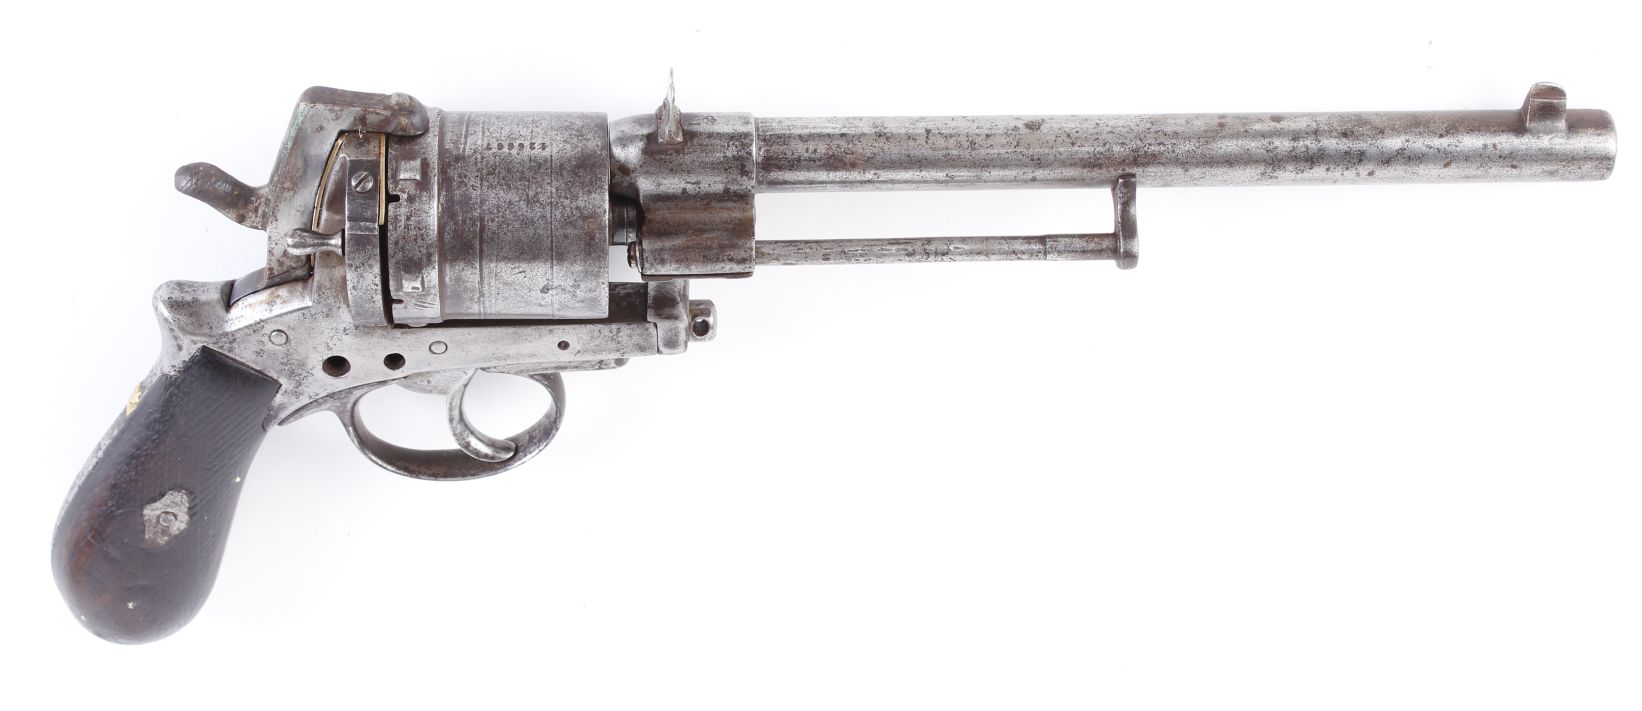 (S58) Rare 11mm Gasser M1870 Pinfire revolver, 9¼ ins round barrel, blade foresight, elevated